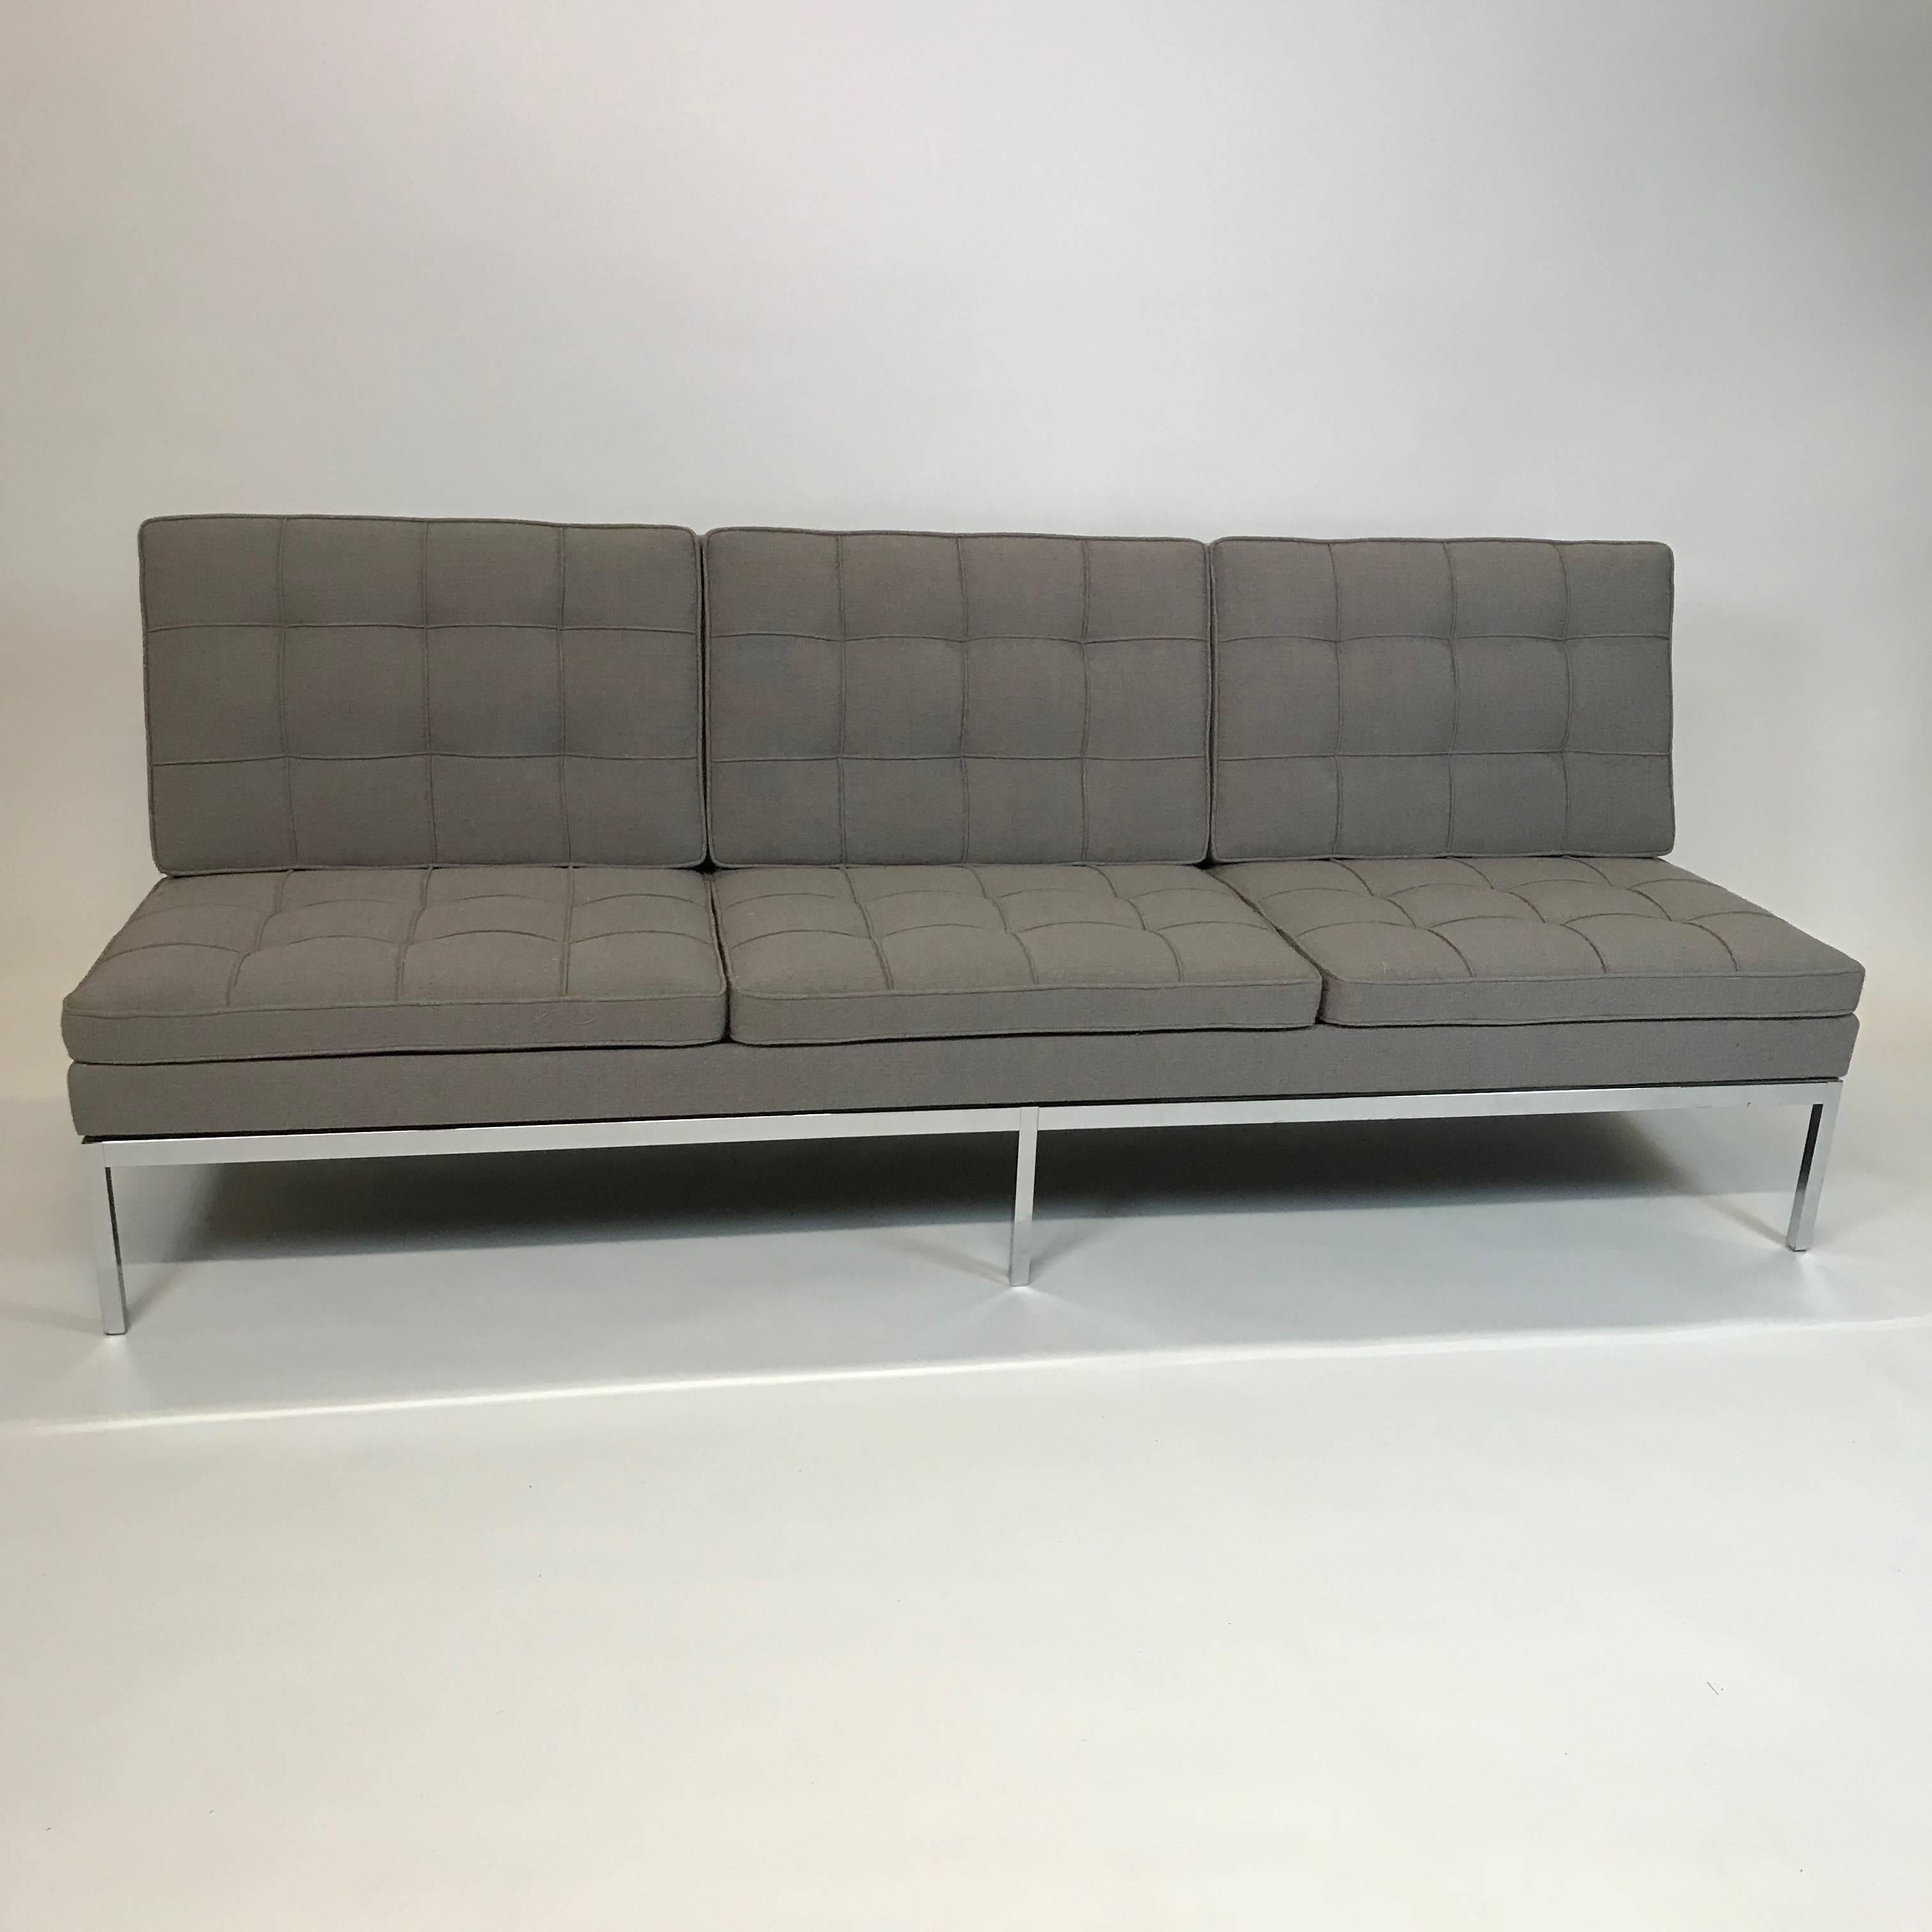 Mid-Century Modern, three-seat, armless sofa by Florence Knoll features a chrome frame with new, box-stitch upholstery in medium gray, cotton linen.